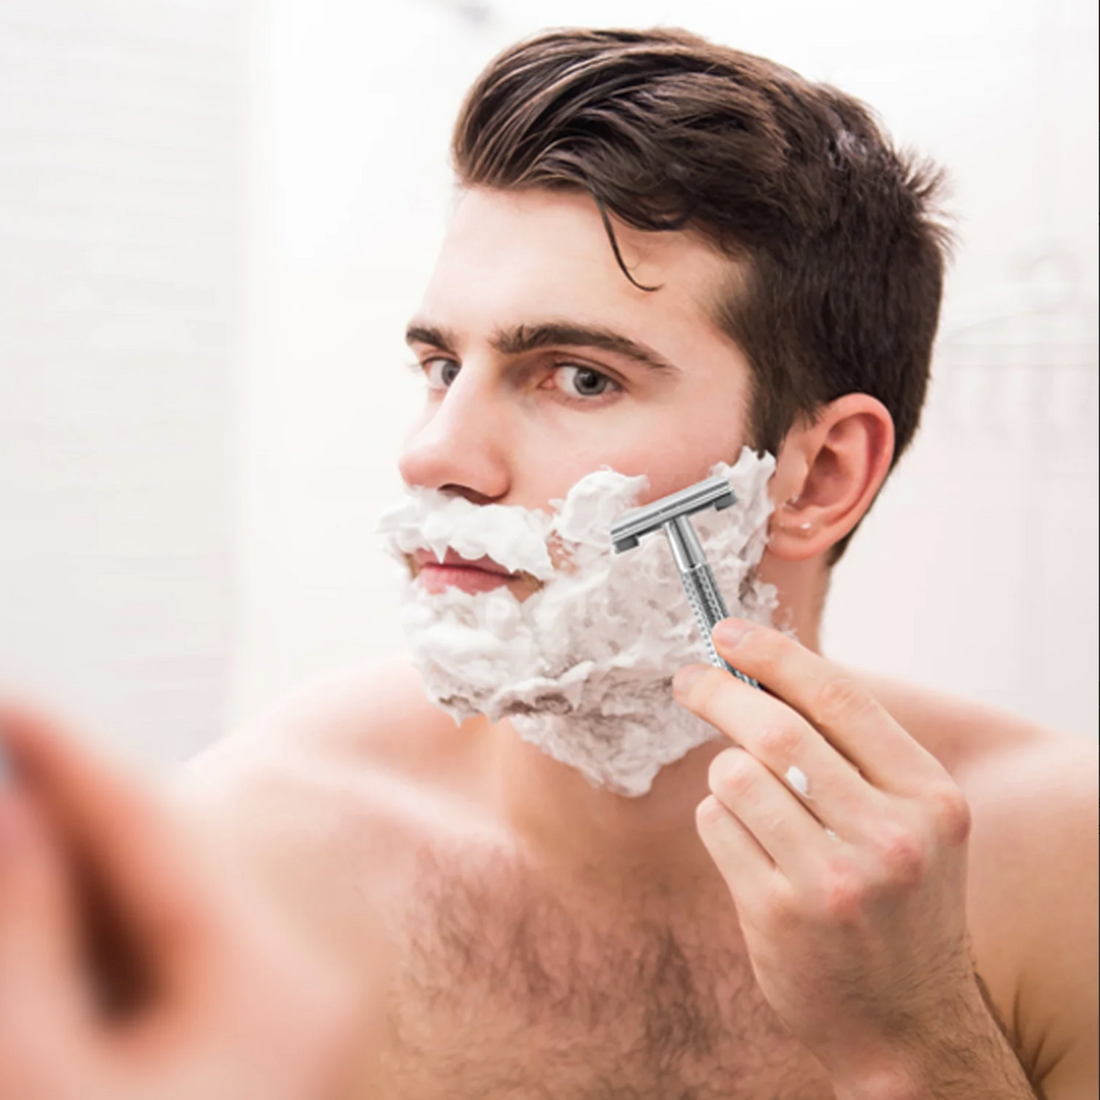 What are old fashioned razors called and How do you use an old fashioned safety razor?